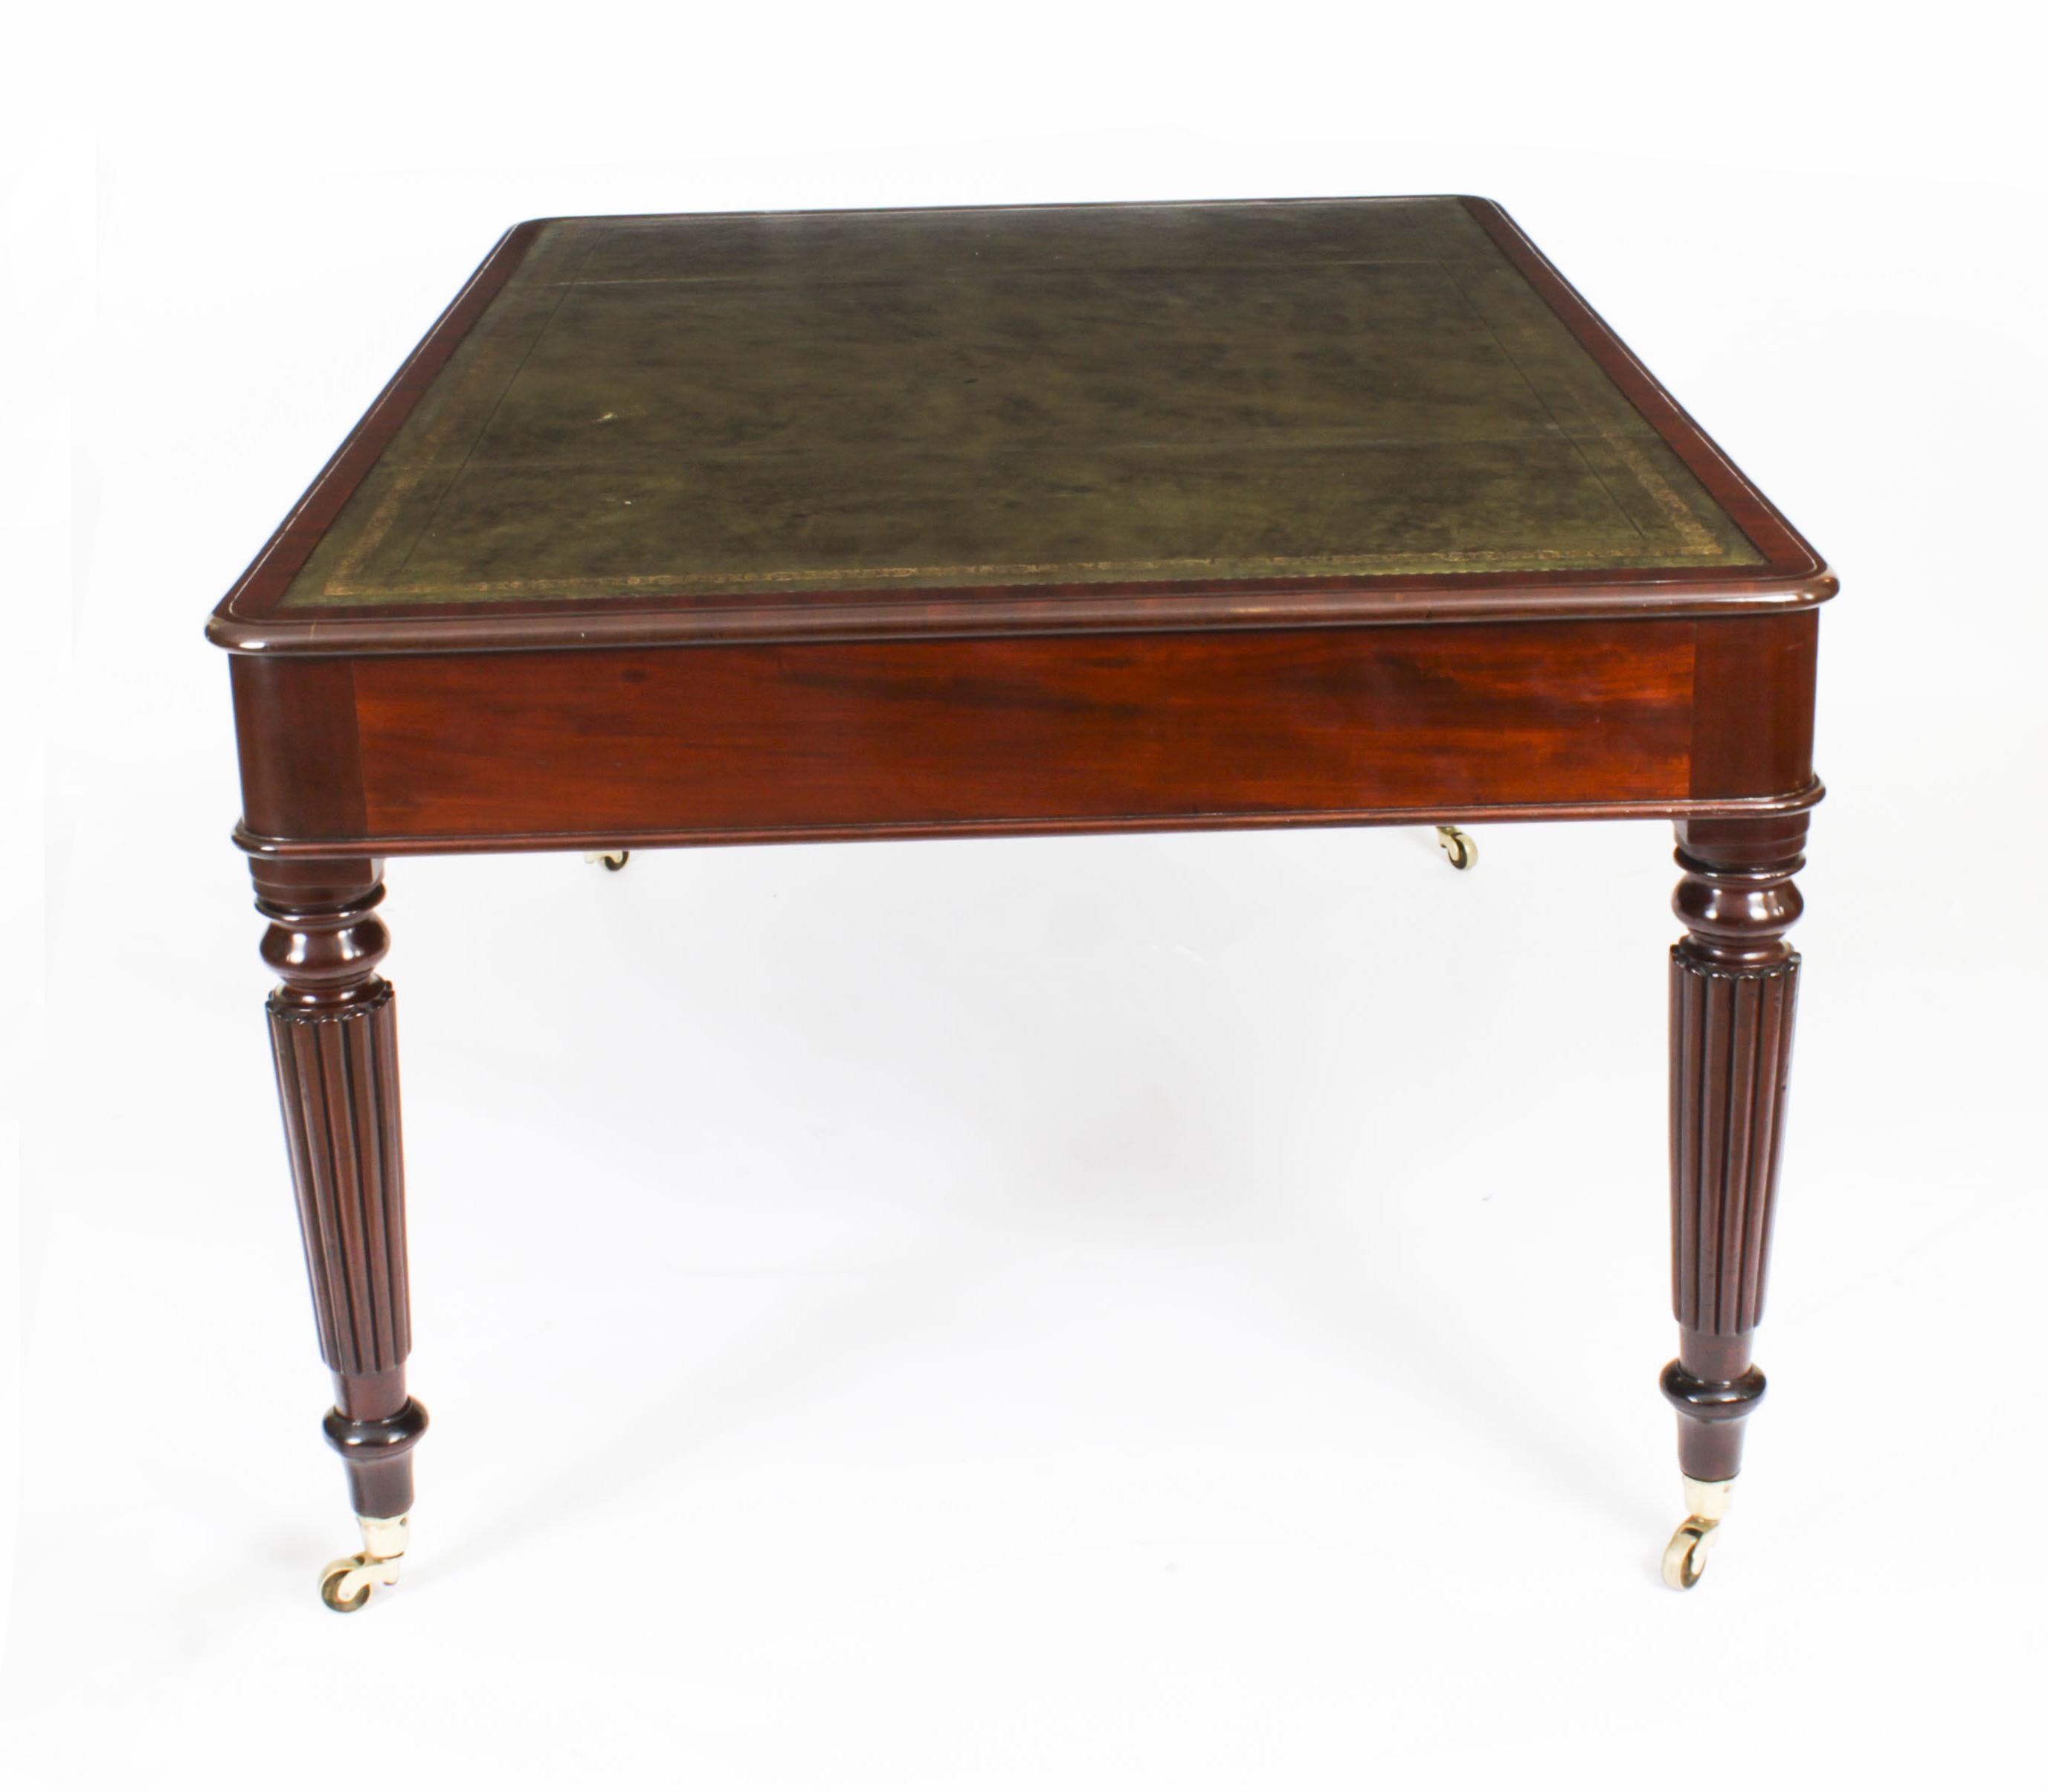 This is a superb antique William IV partners writing table in the manner of Gillows, crafted from beautiful mahogany and dating from Circa 1830.
   
The rectangular top features a moulded edge with an inset gold tooled green leather writing surface